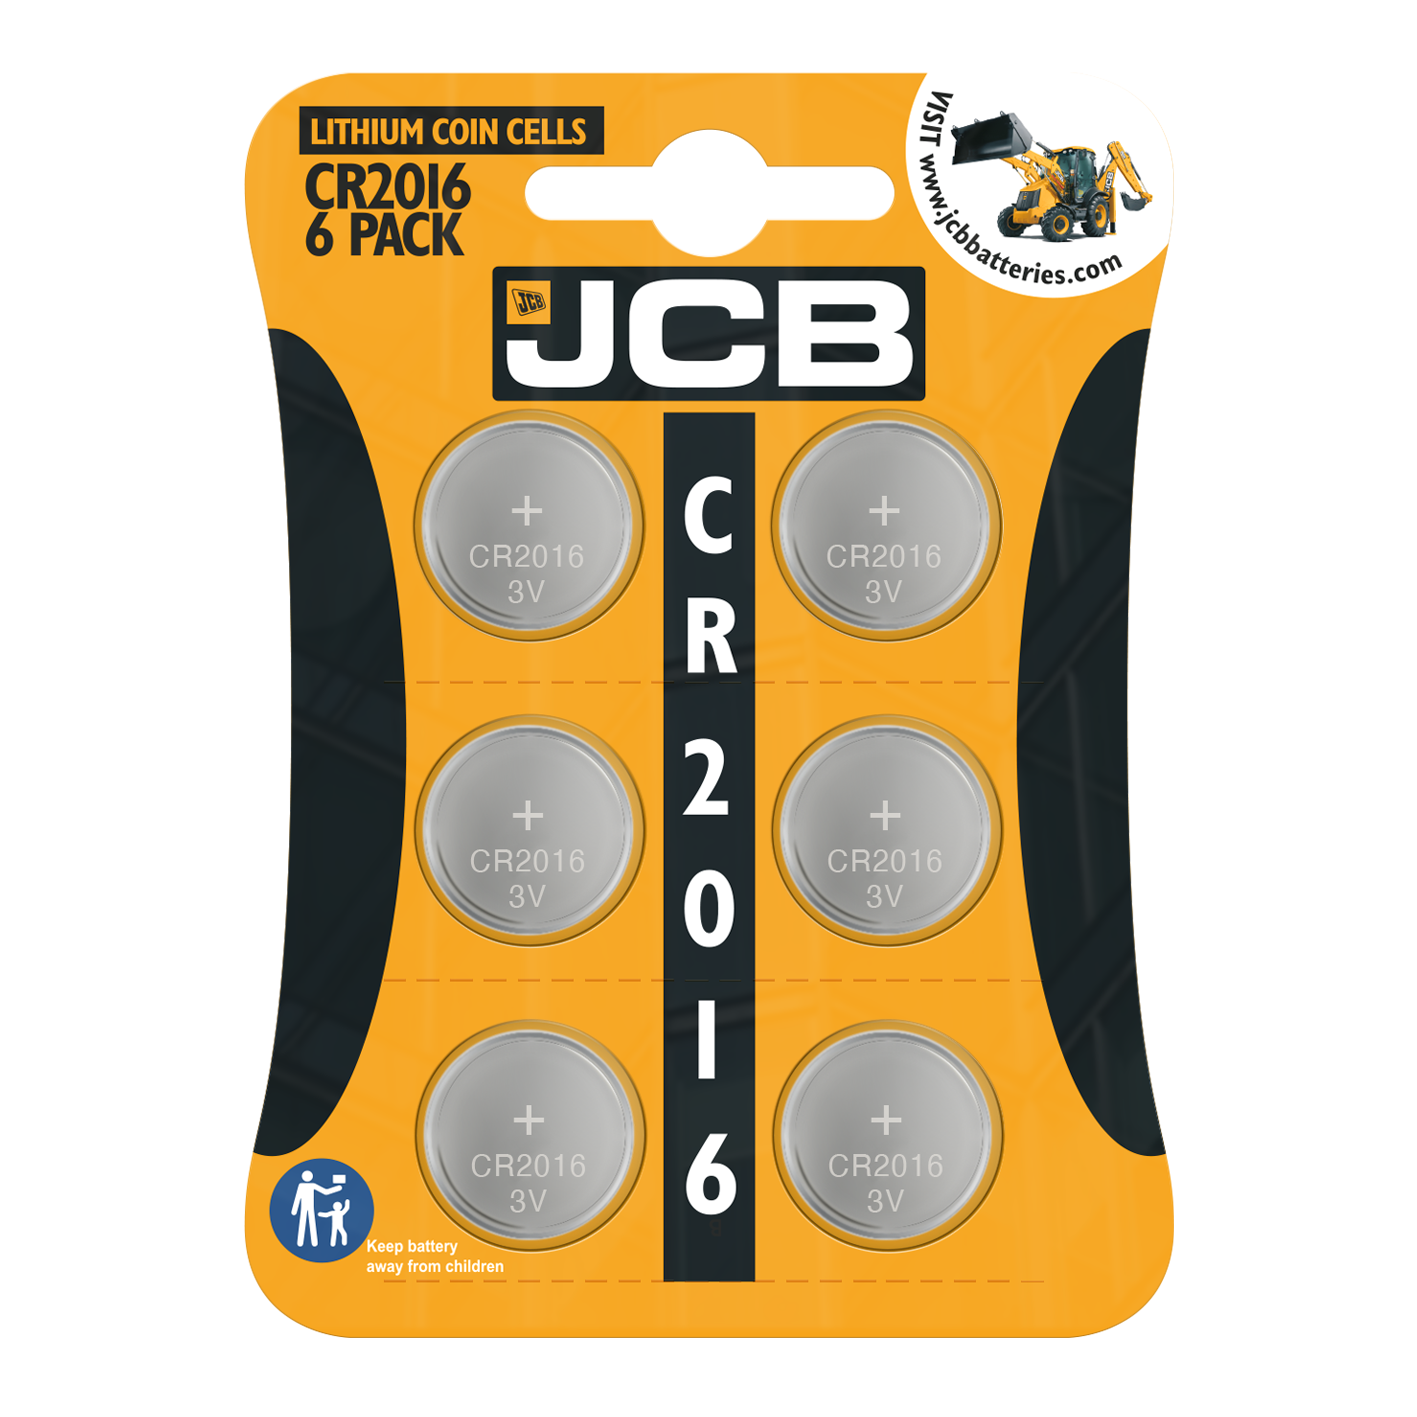 JCB CR2016 Lithium Coin Cell, Pack of 6